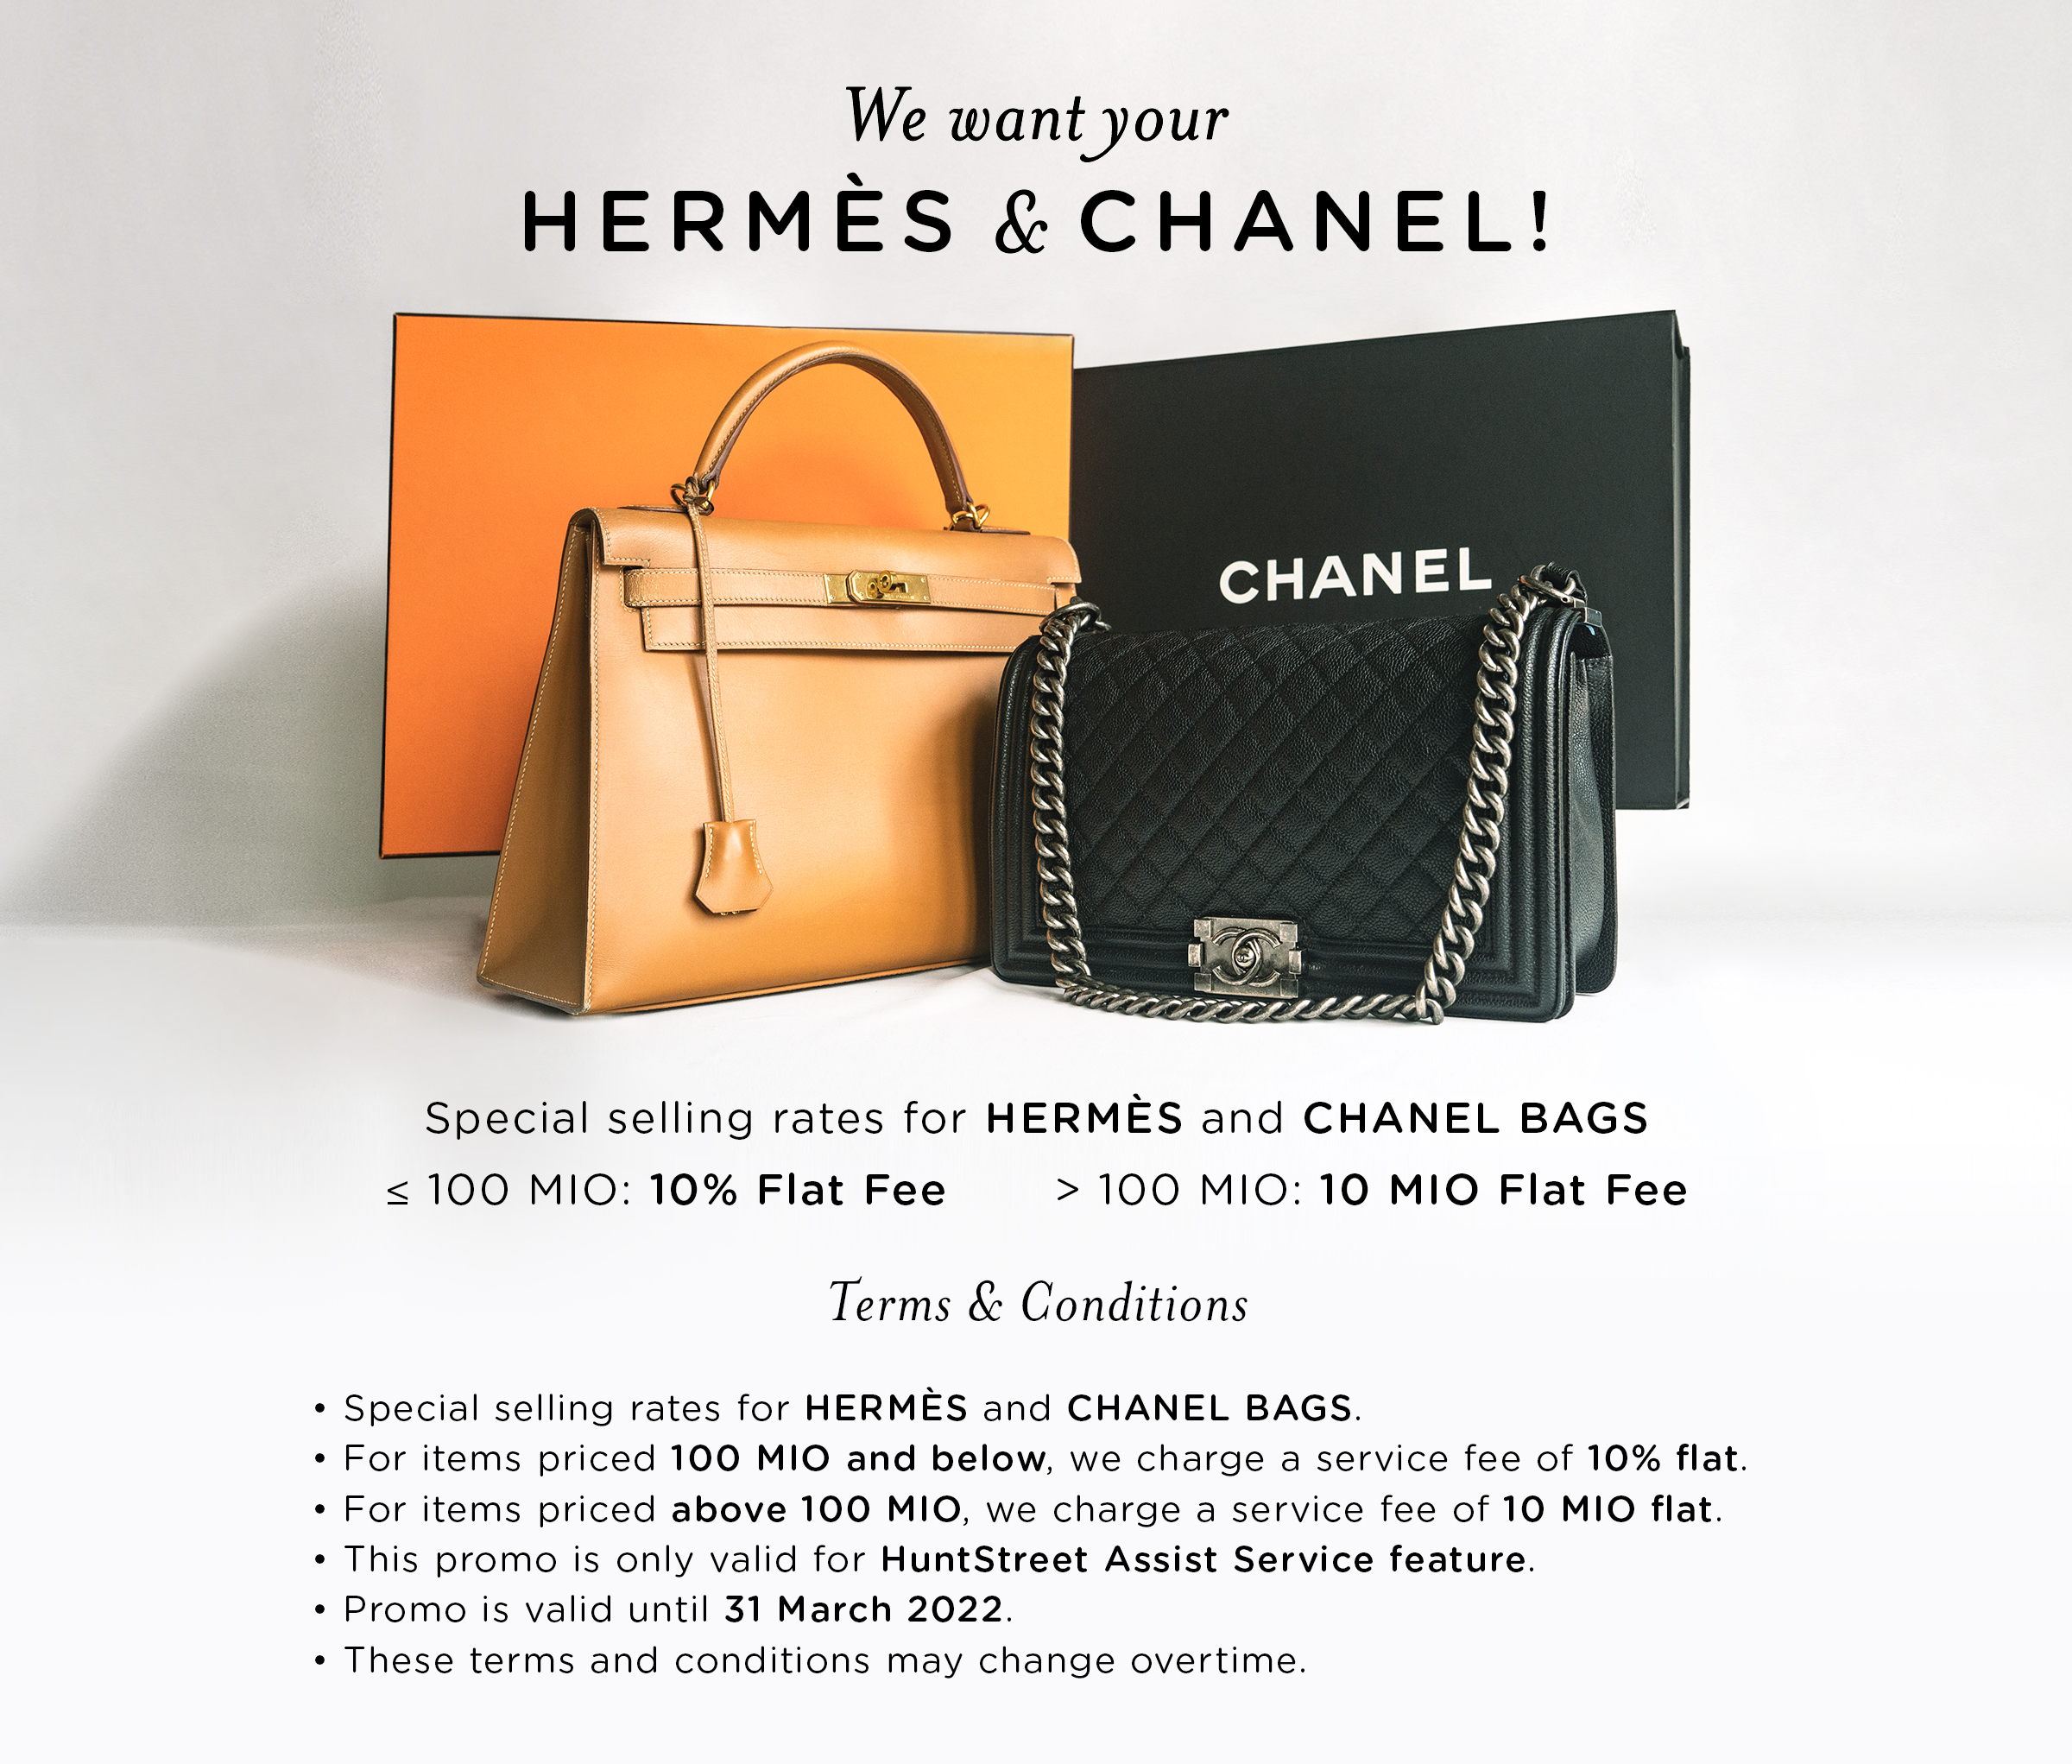 We want your Hermès & Chanel